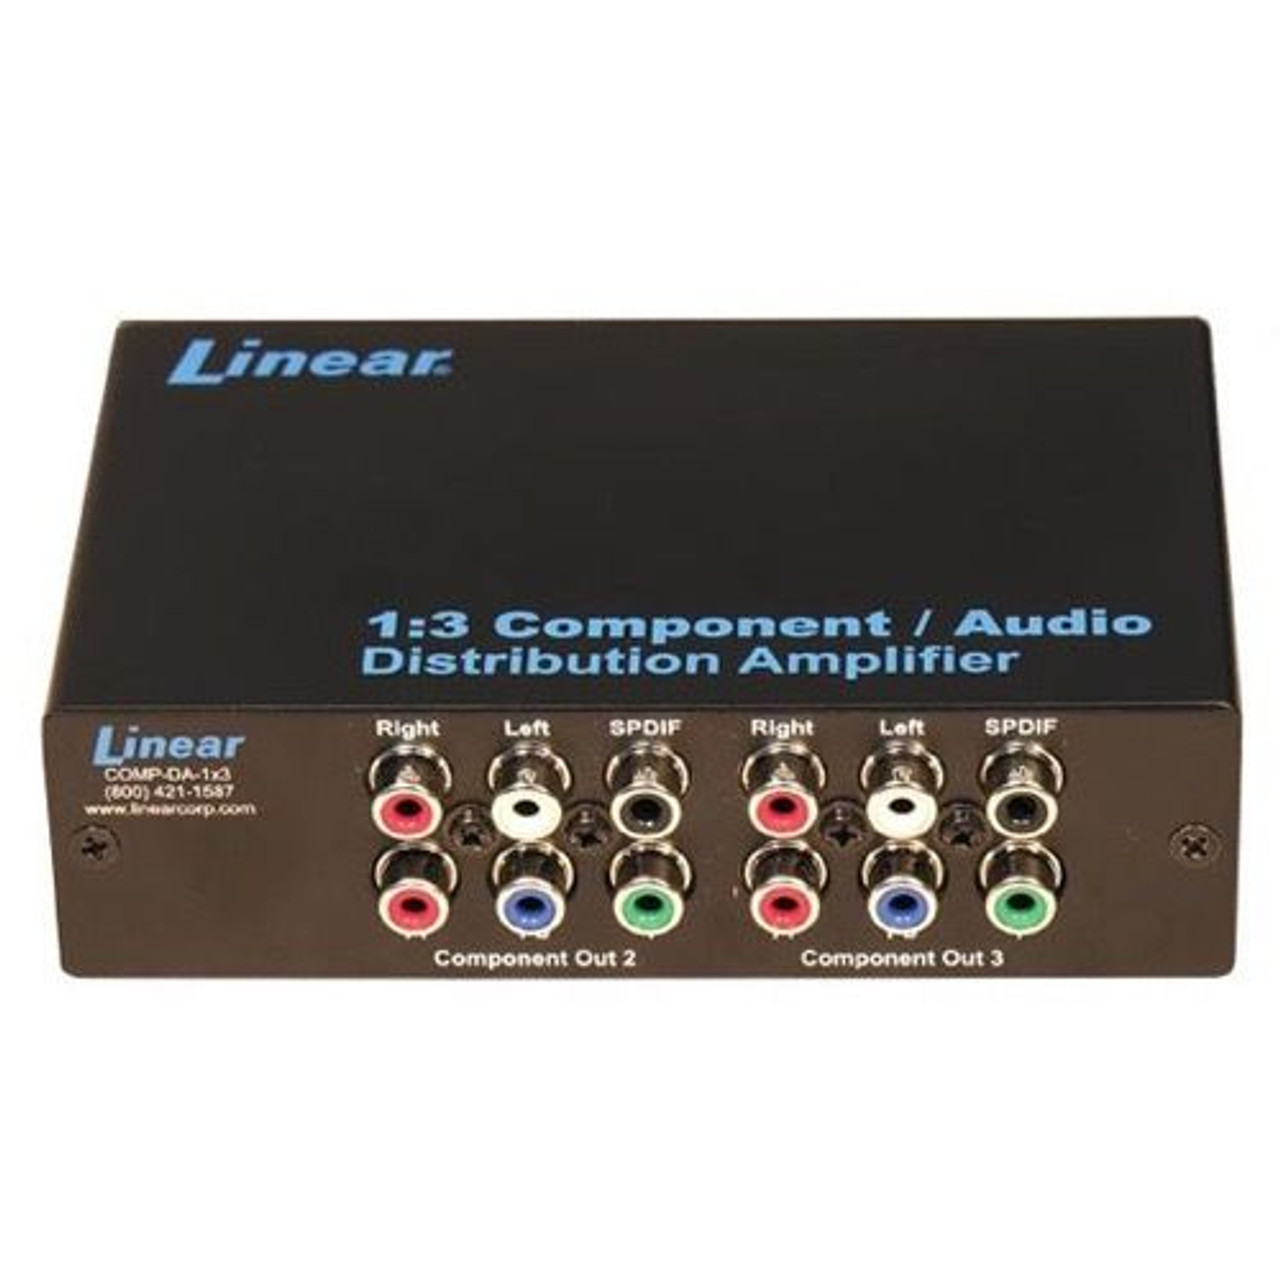 Linear COMP-DA-1X3 Component Audio Distribution Amplifier One to 3-Way Display Distributes One HD 1.3 Component Video Source with Audio to Three TV Locations, 1 Input to 3 Output, Part # COMPDA1X3